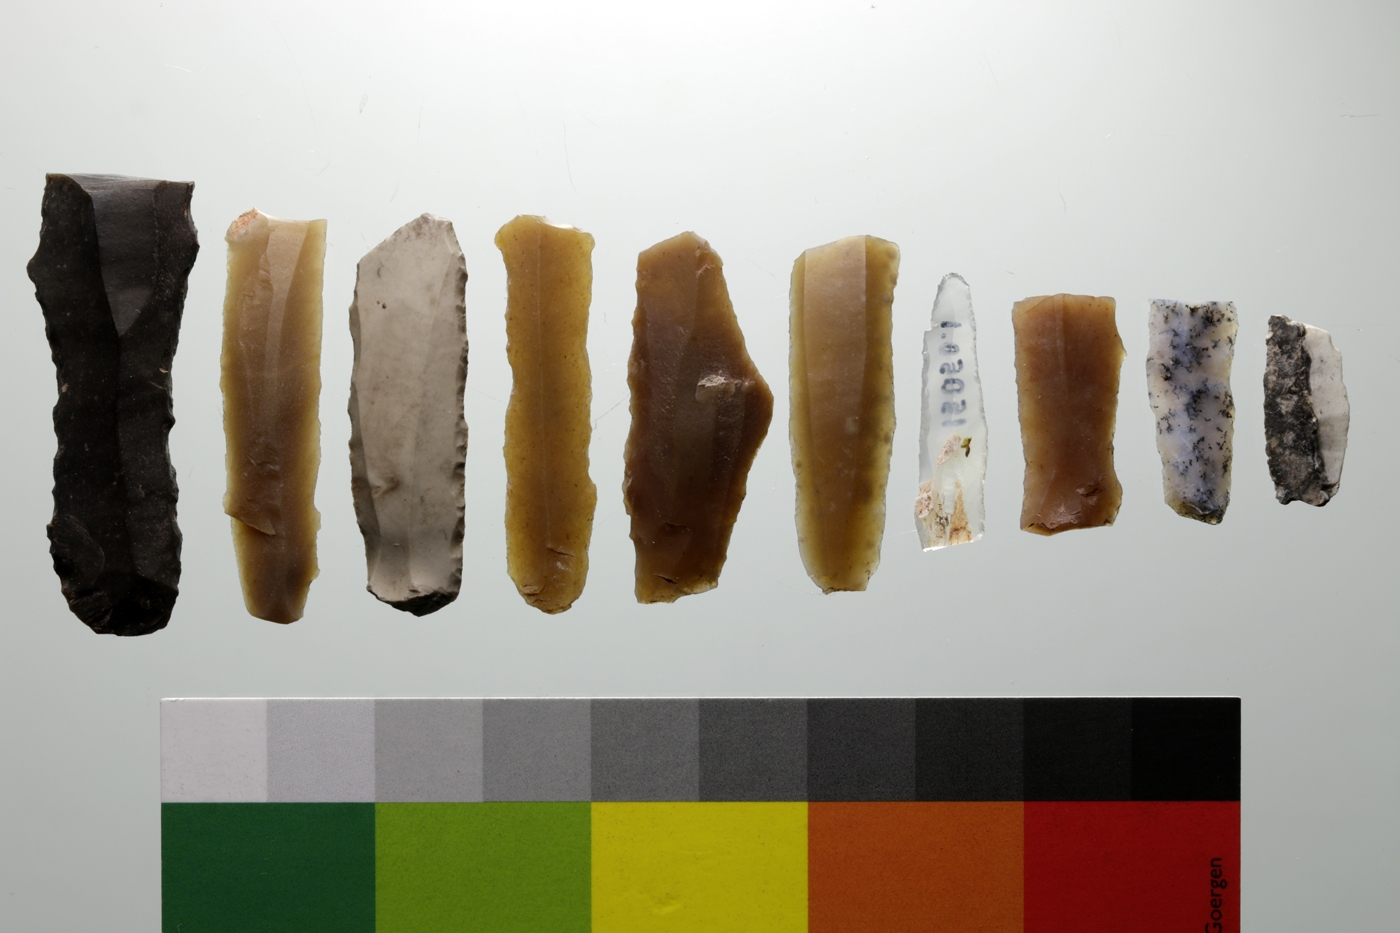 A variety of blades made on different raw materials. Some have heavily retouched edges, others have minimal or no evidence of retouch.